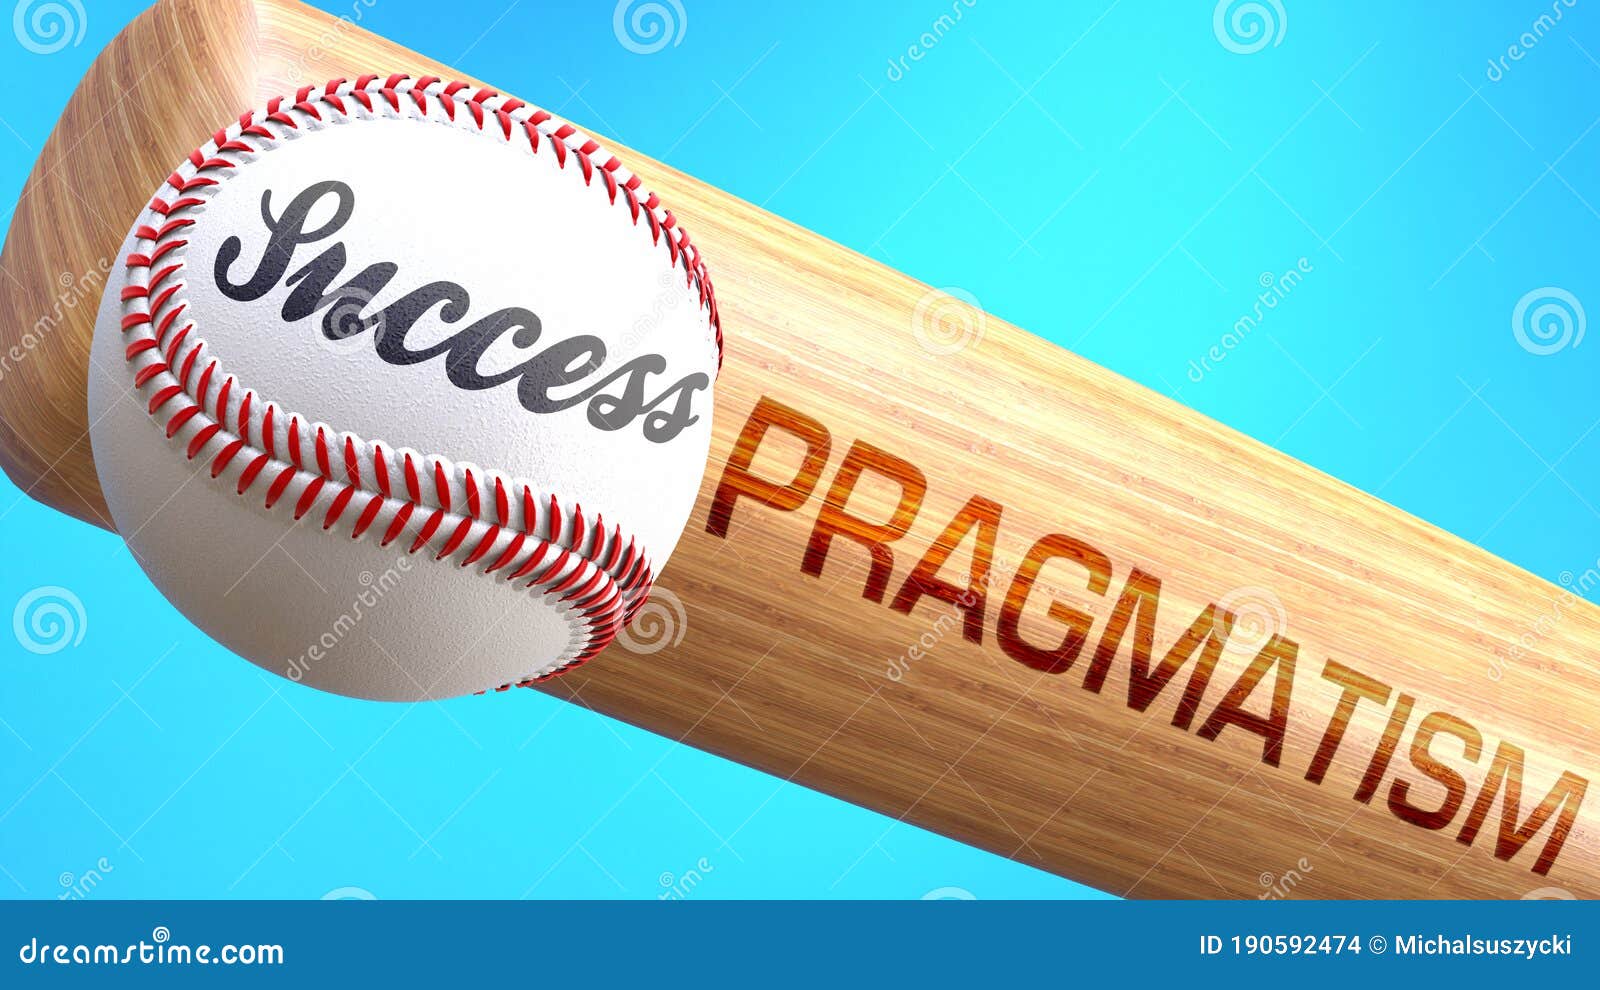 success in life depends on pragmatism - pictured as word pragmatism on a bat, to show that pragmatism is crucial for successful